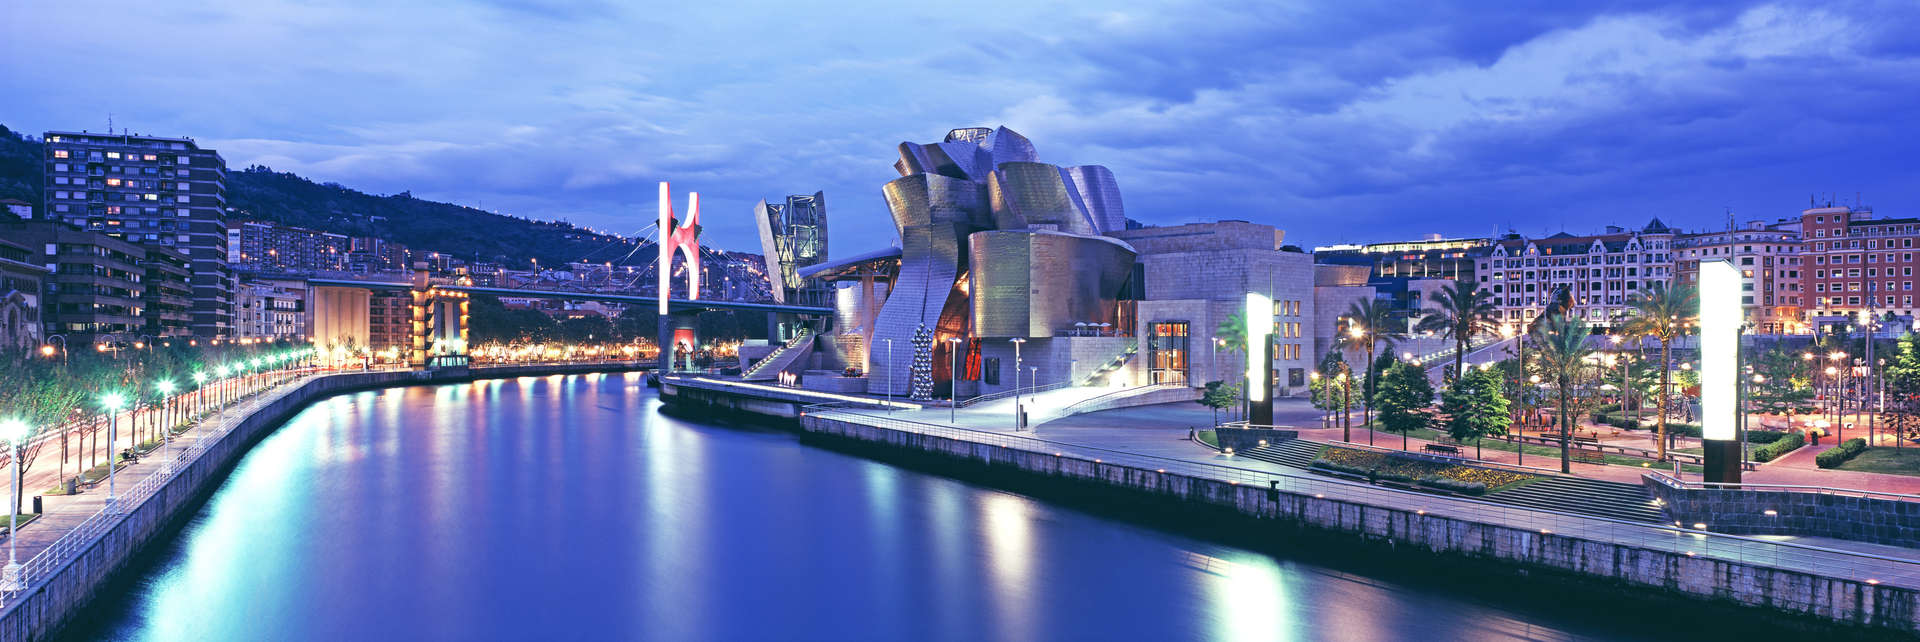 The Guggenheim Bilbao, designed by Frank Gehry